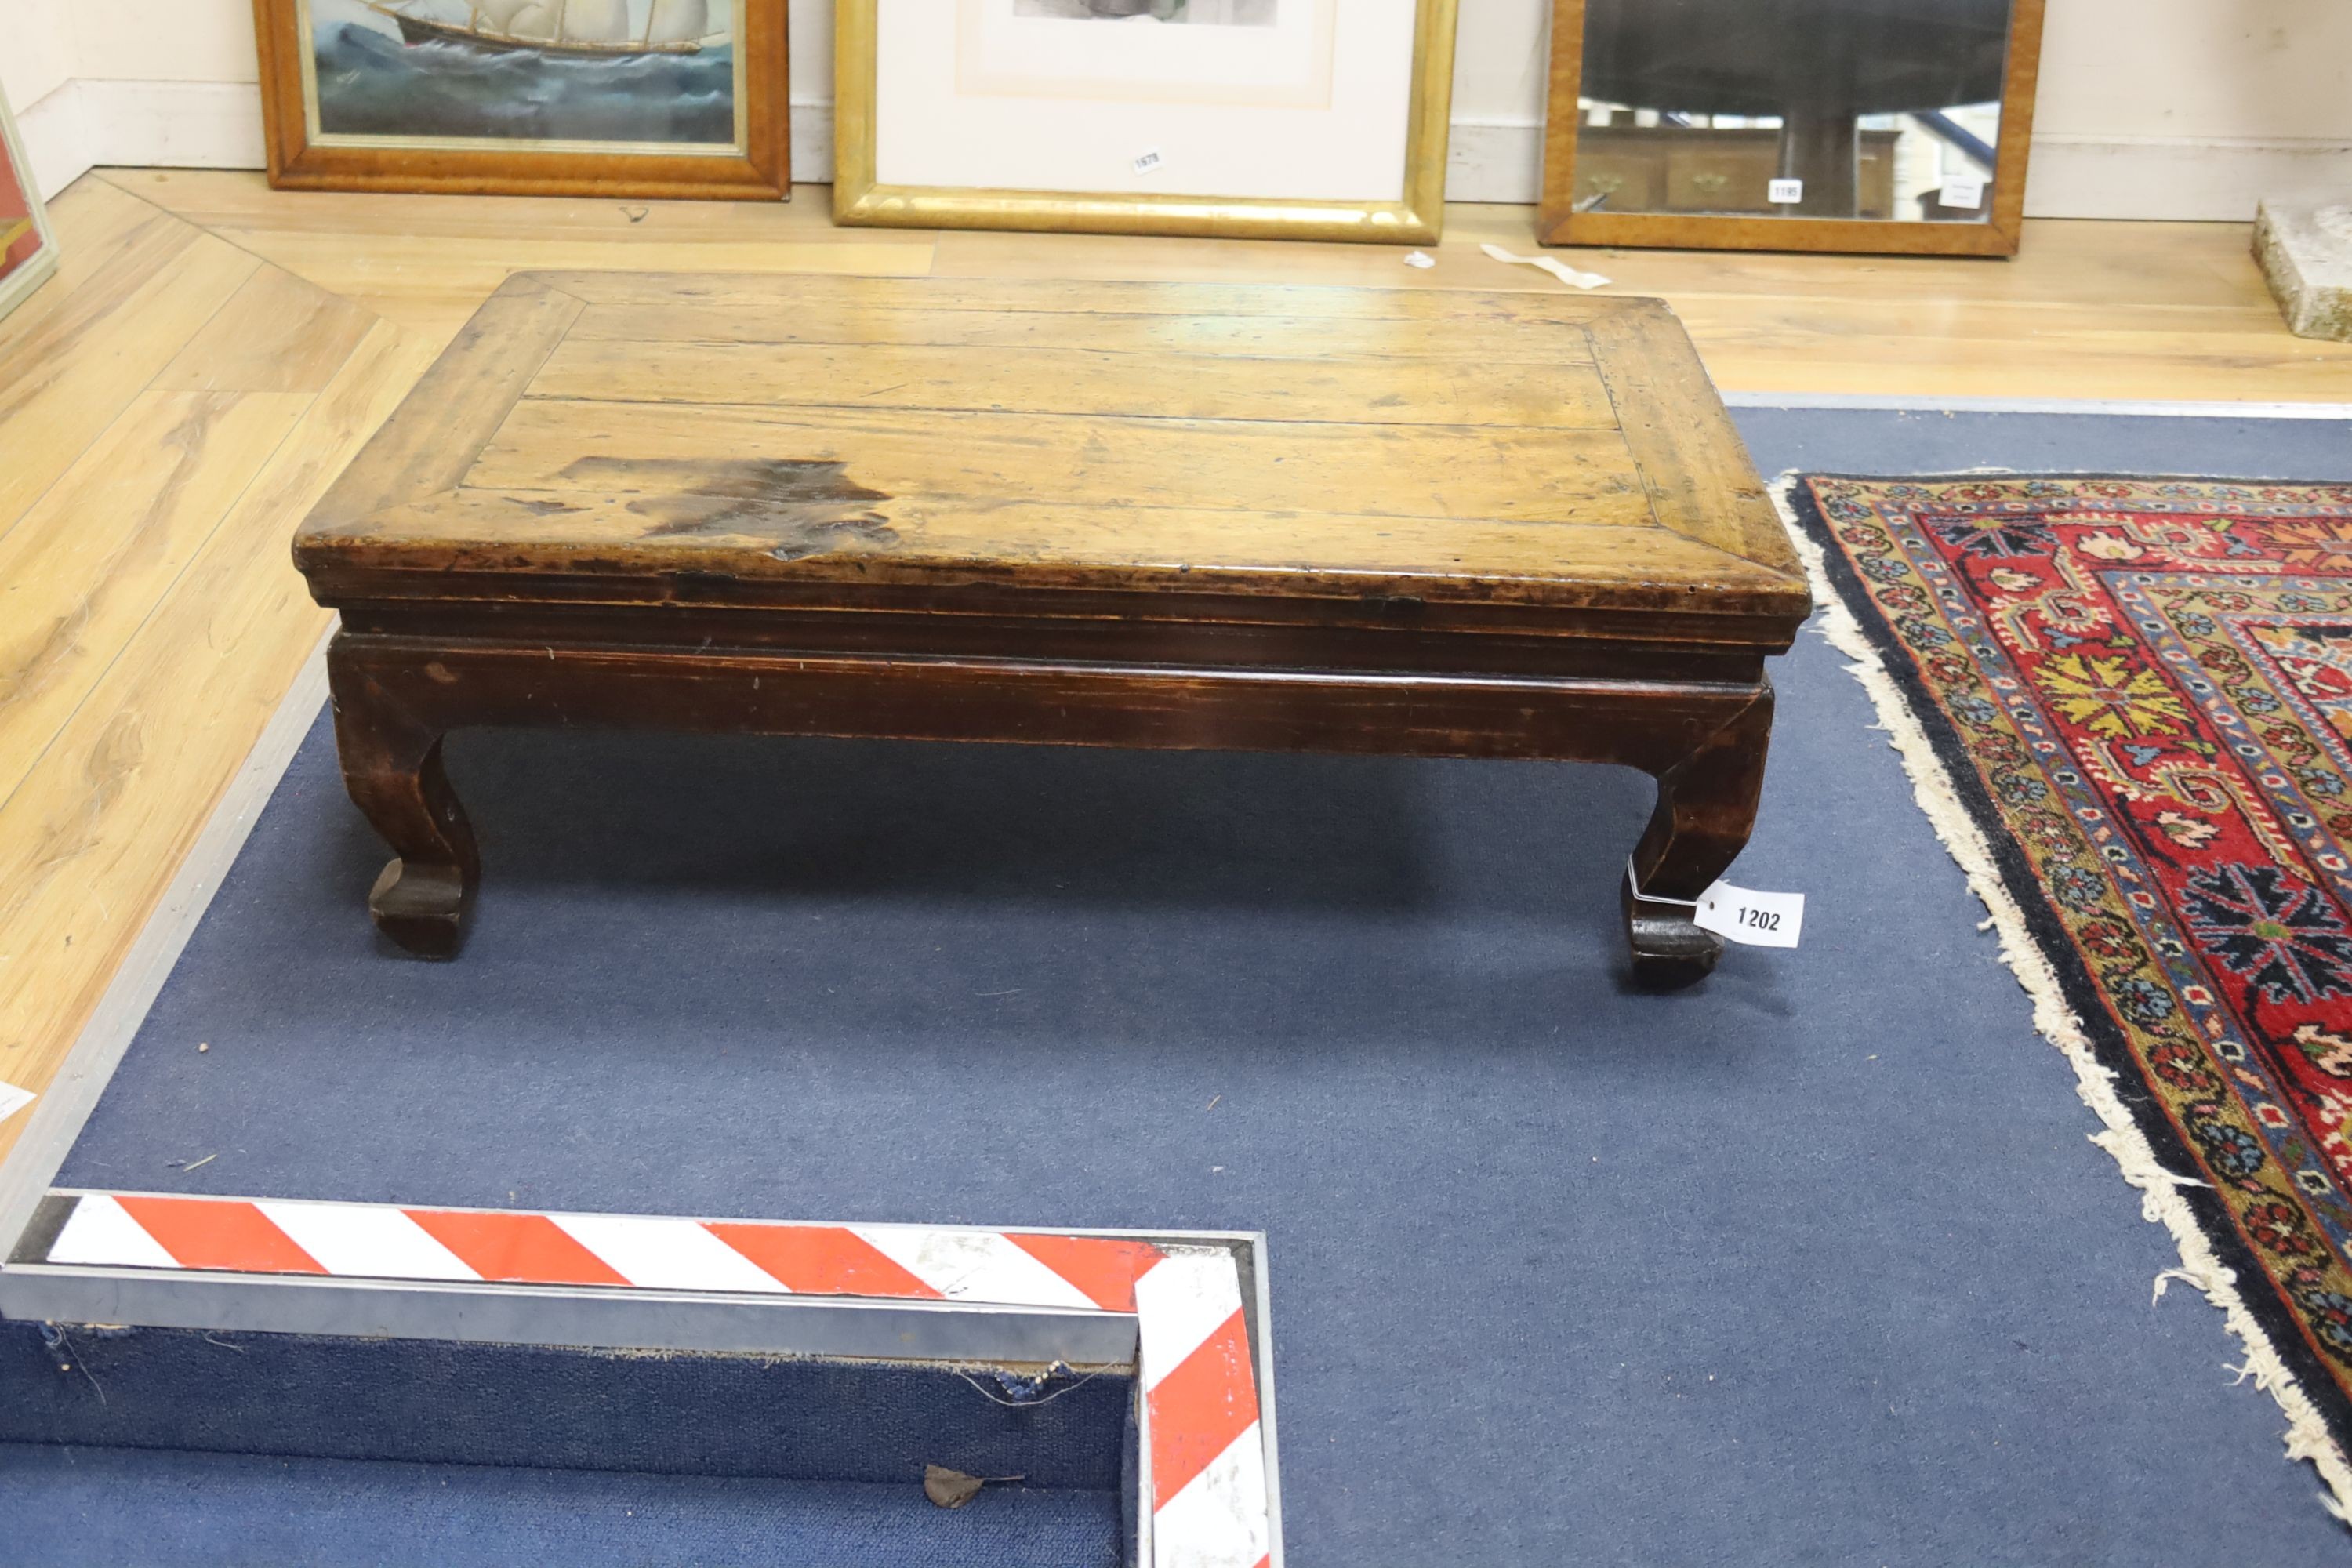 A 19th century Chinese wood Kang table, width 78cm, depth 46cm, height 27cm